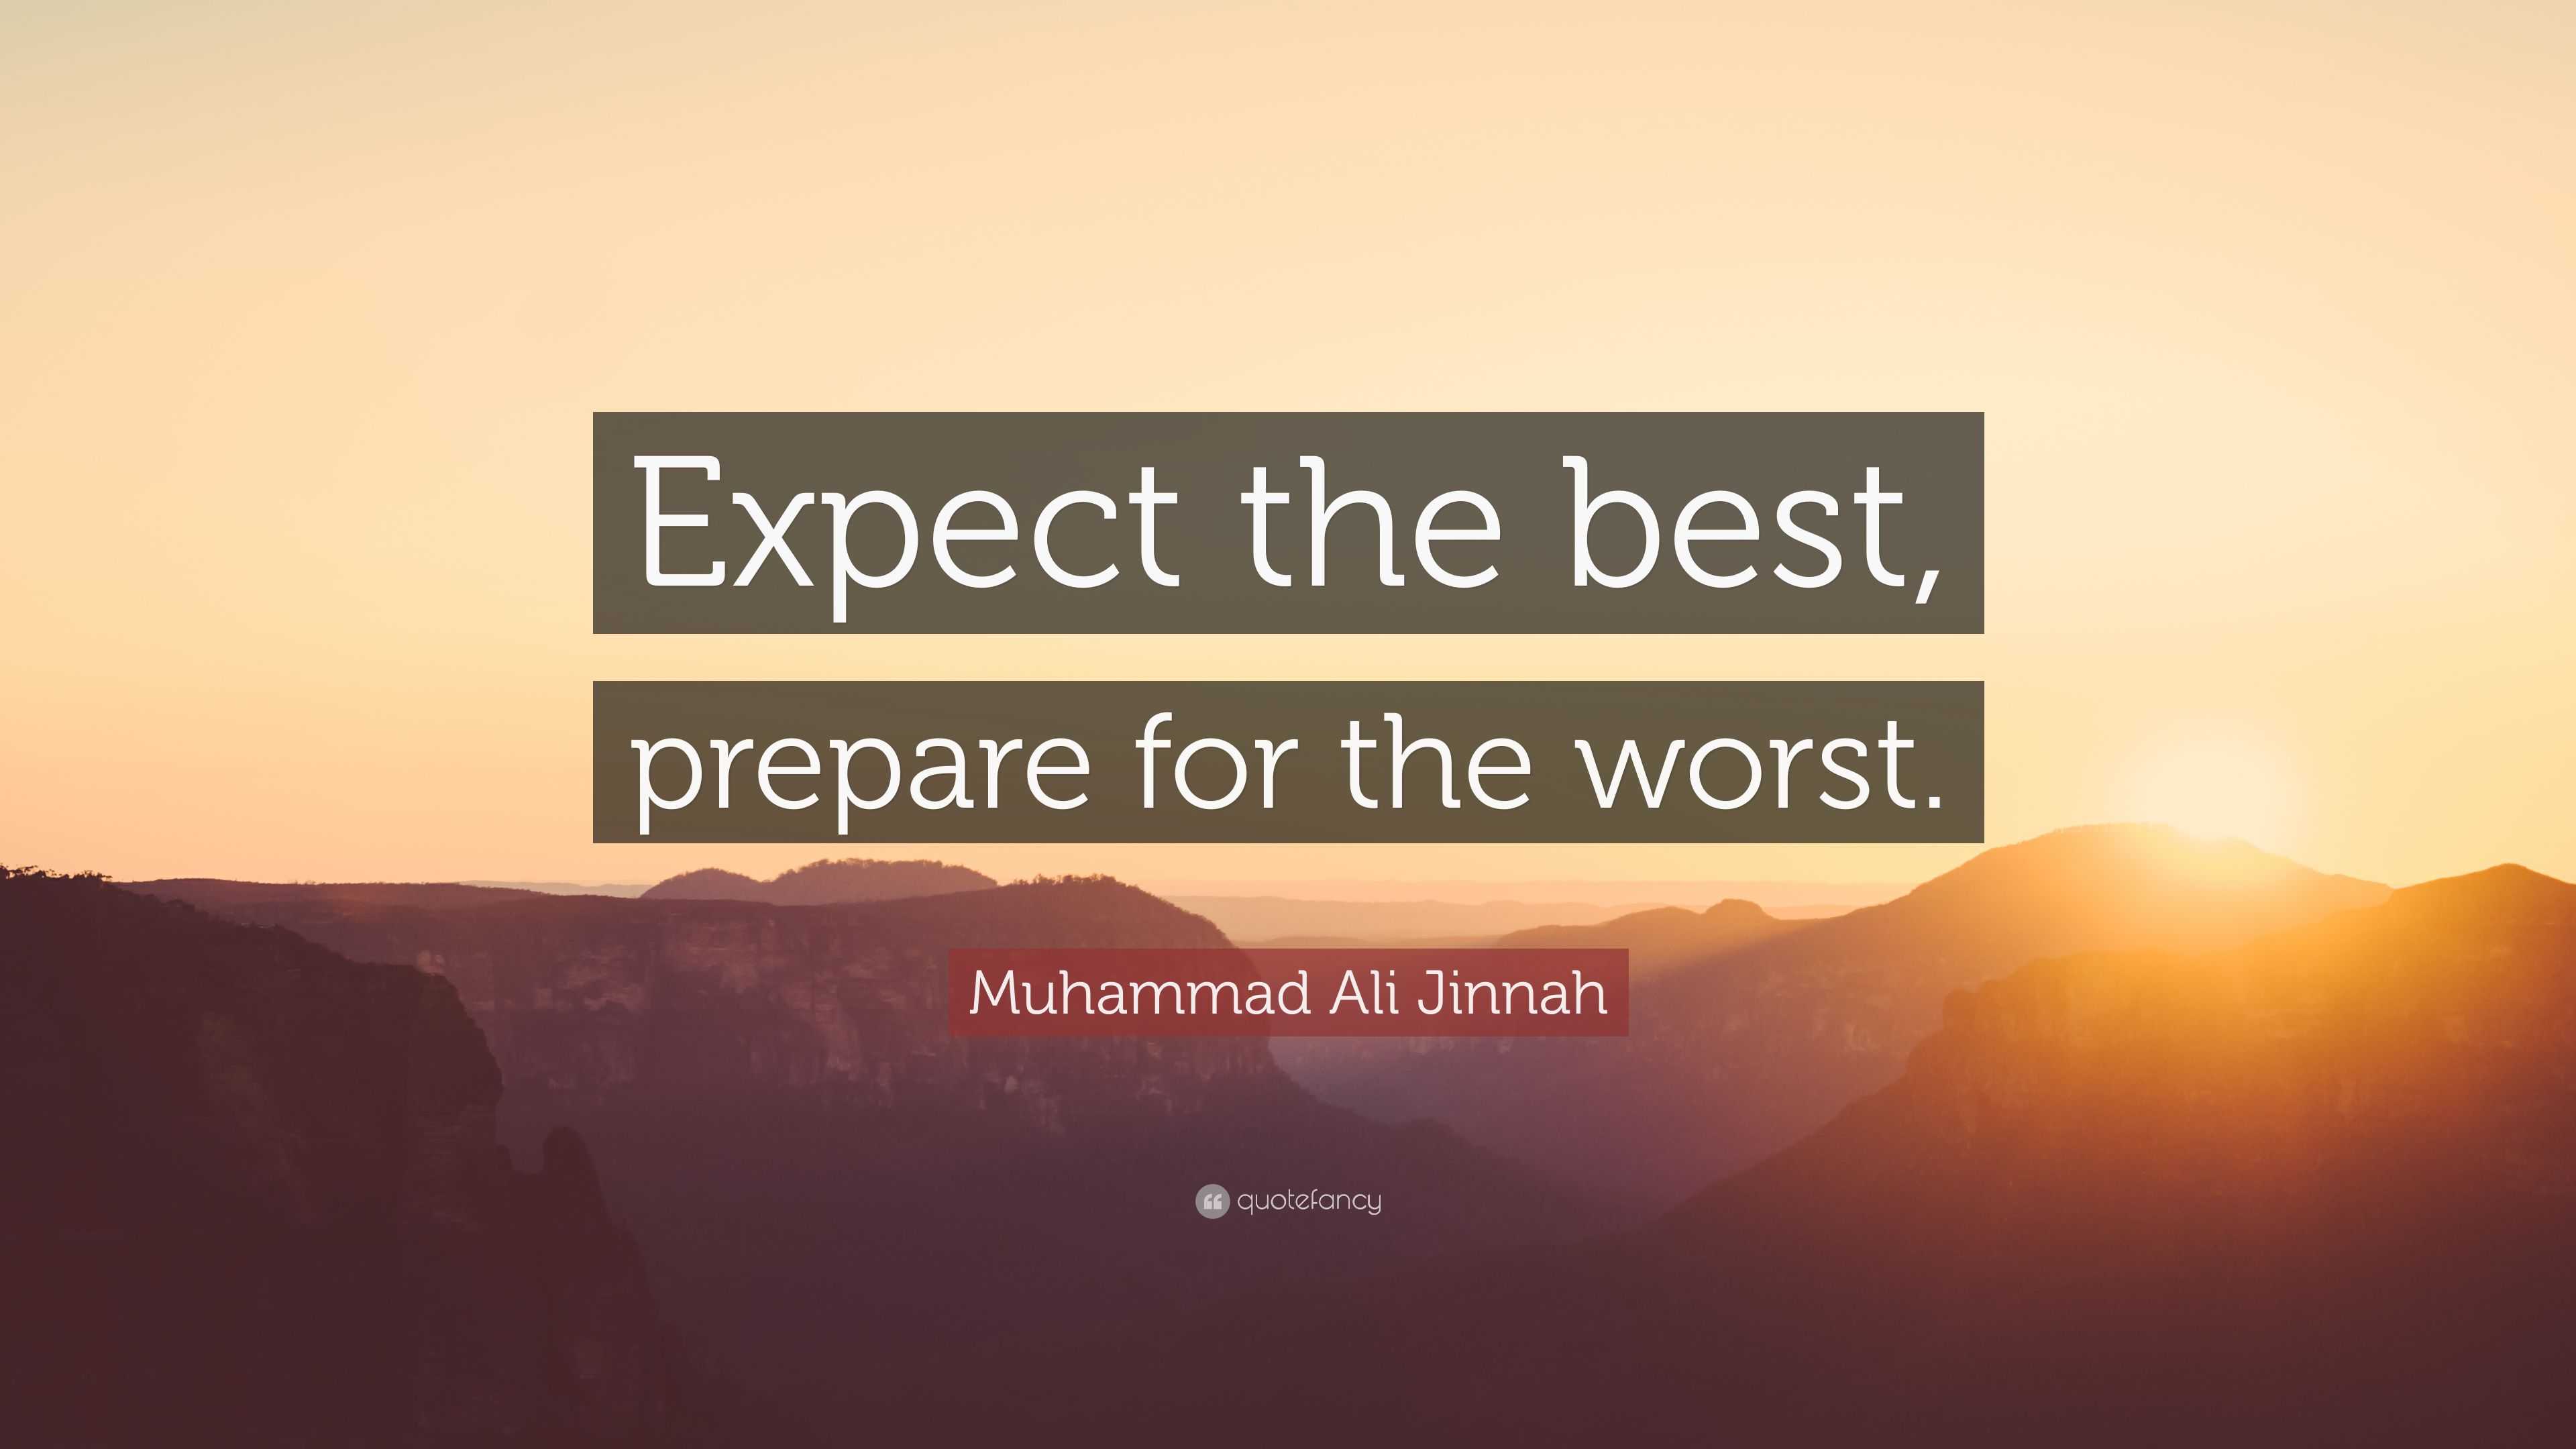 Muhammad Ali Jinnah Quote: "Expect the best, prepare for ...